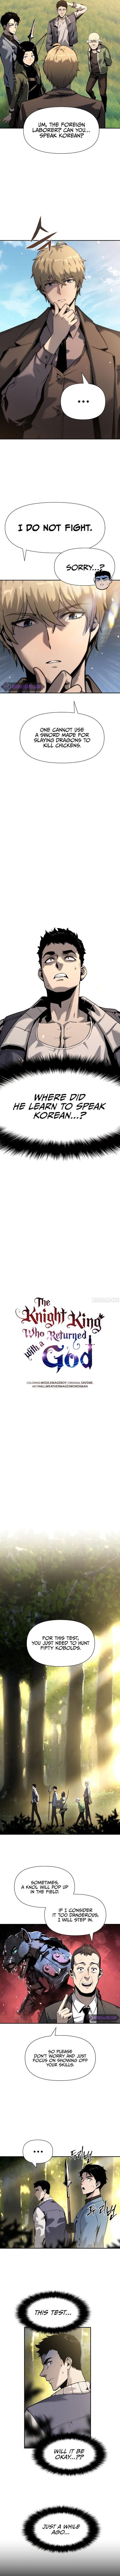 the-knight-king-who-returned-with-a-god-chap-10-2